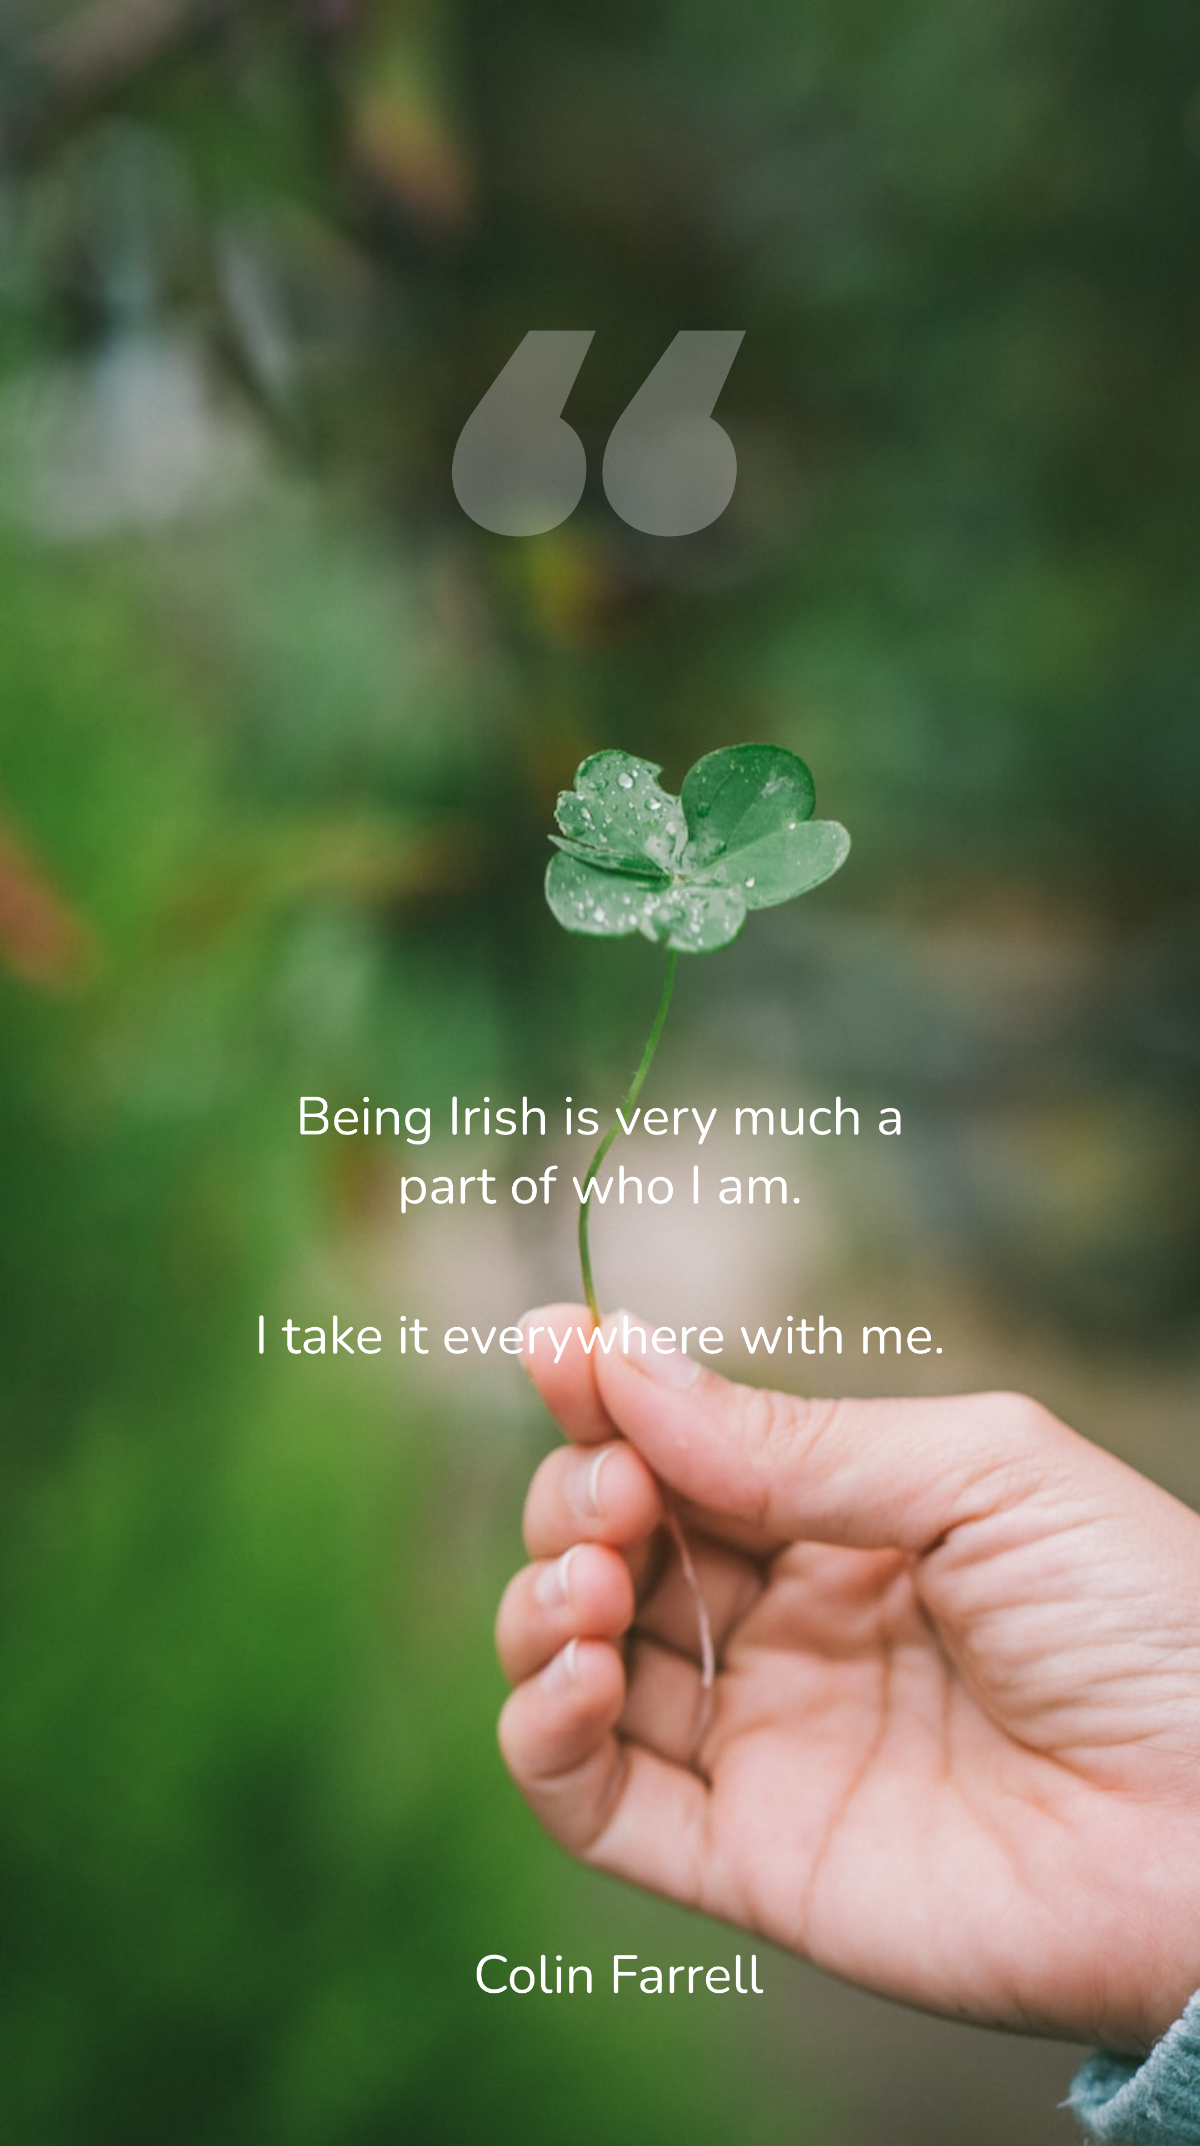 Colin Farrell - Being Irish is very much a part of who I am. I take it everywhere with me. Template